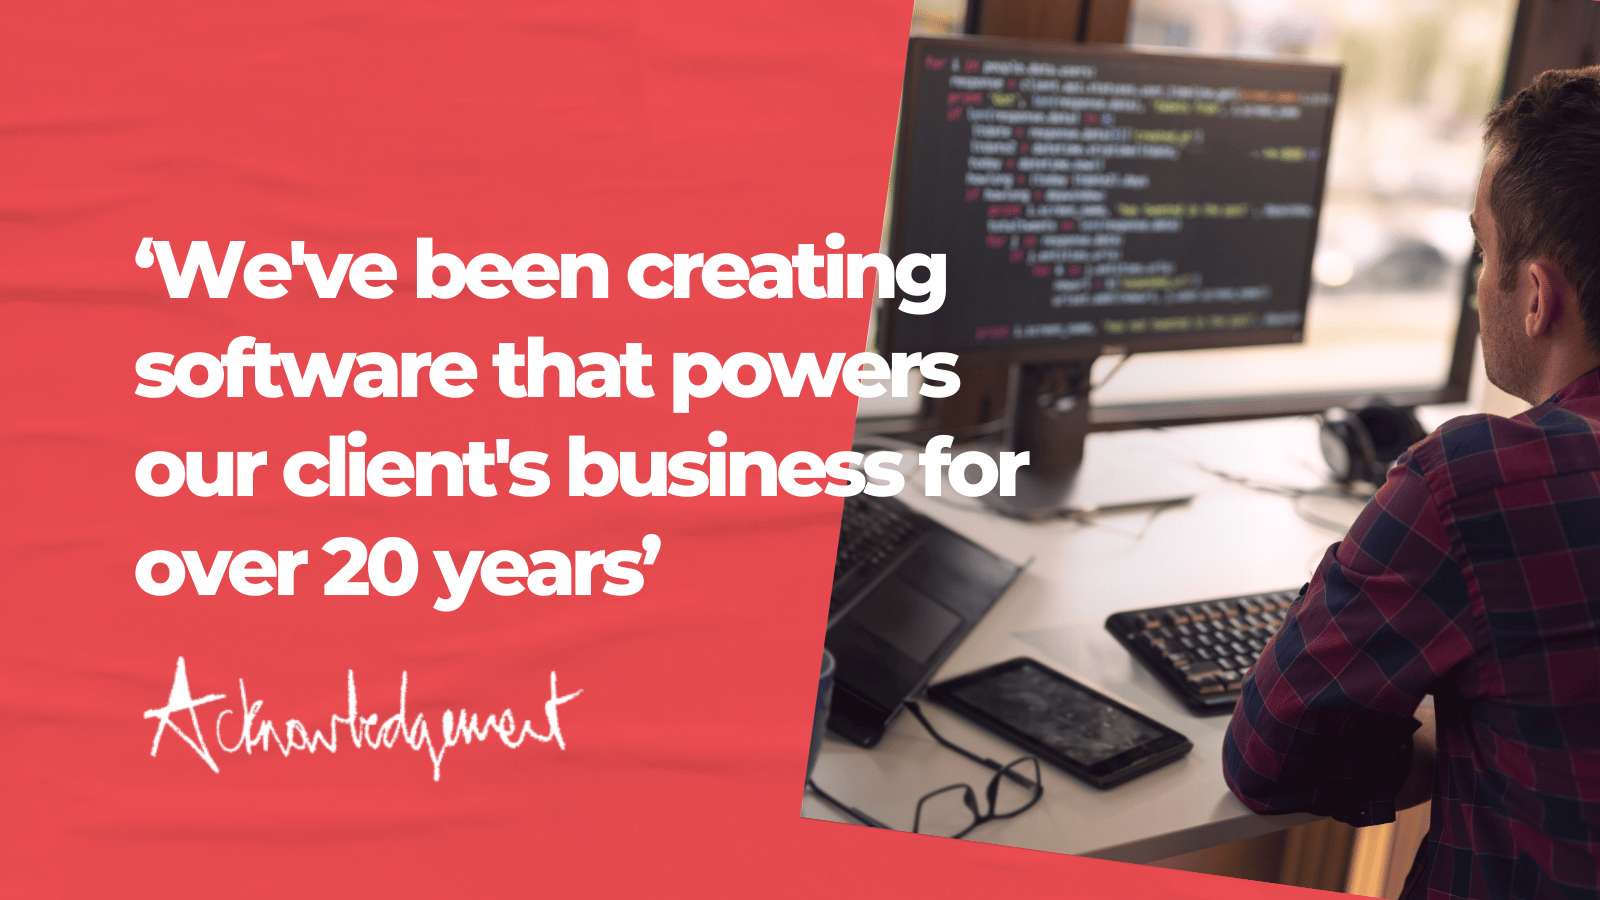 "We've been creating software that powers our client's business for over 20 years" title graphic